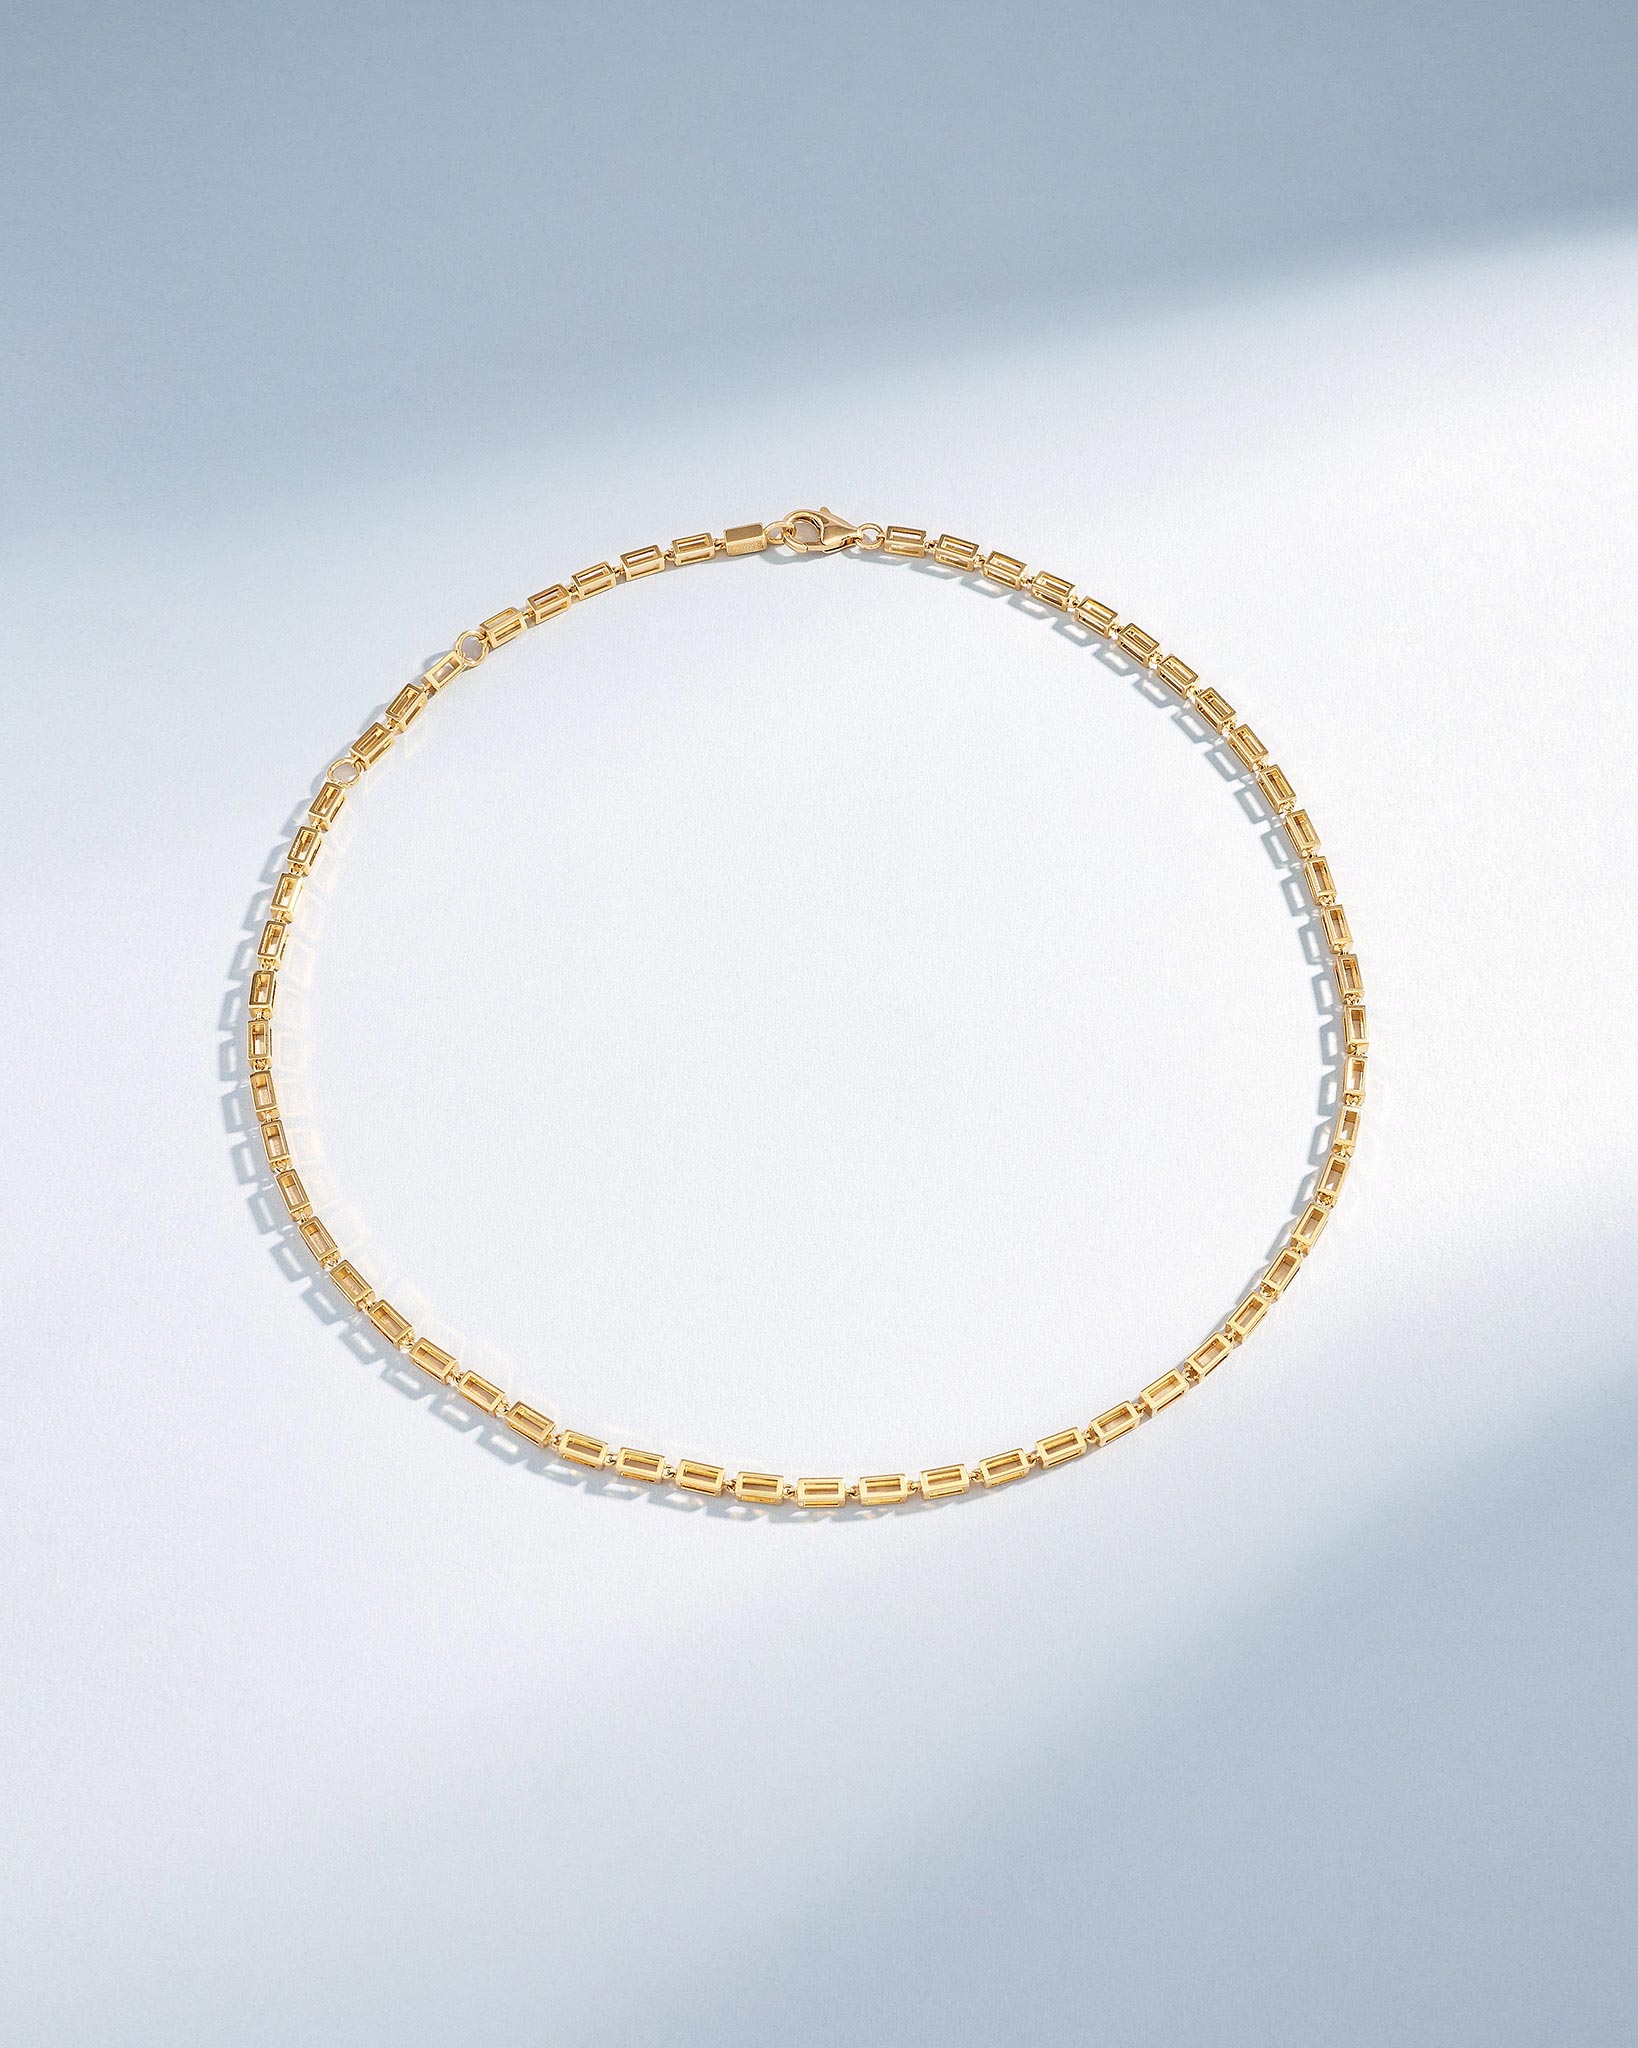 Suzanne Kalan Block-Chain Hollow Thick Necklace in 18k yellow gold